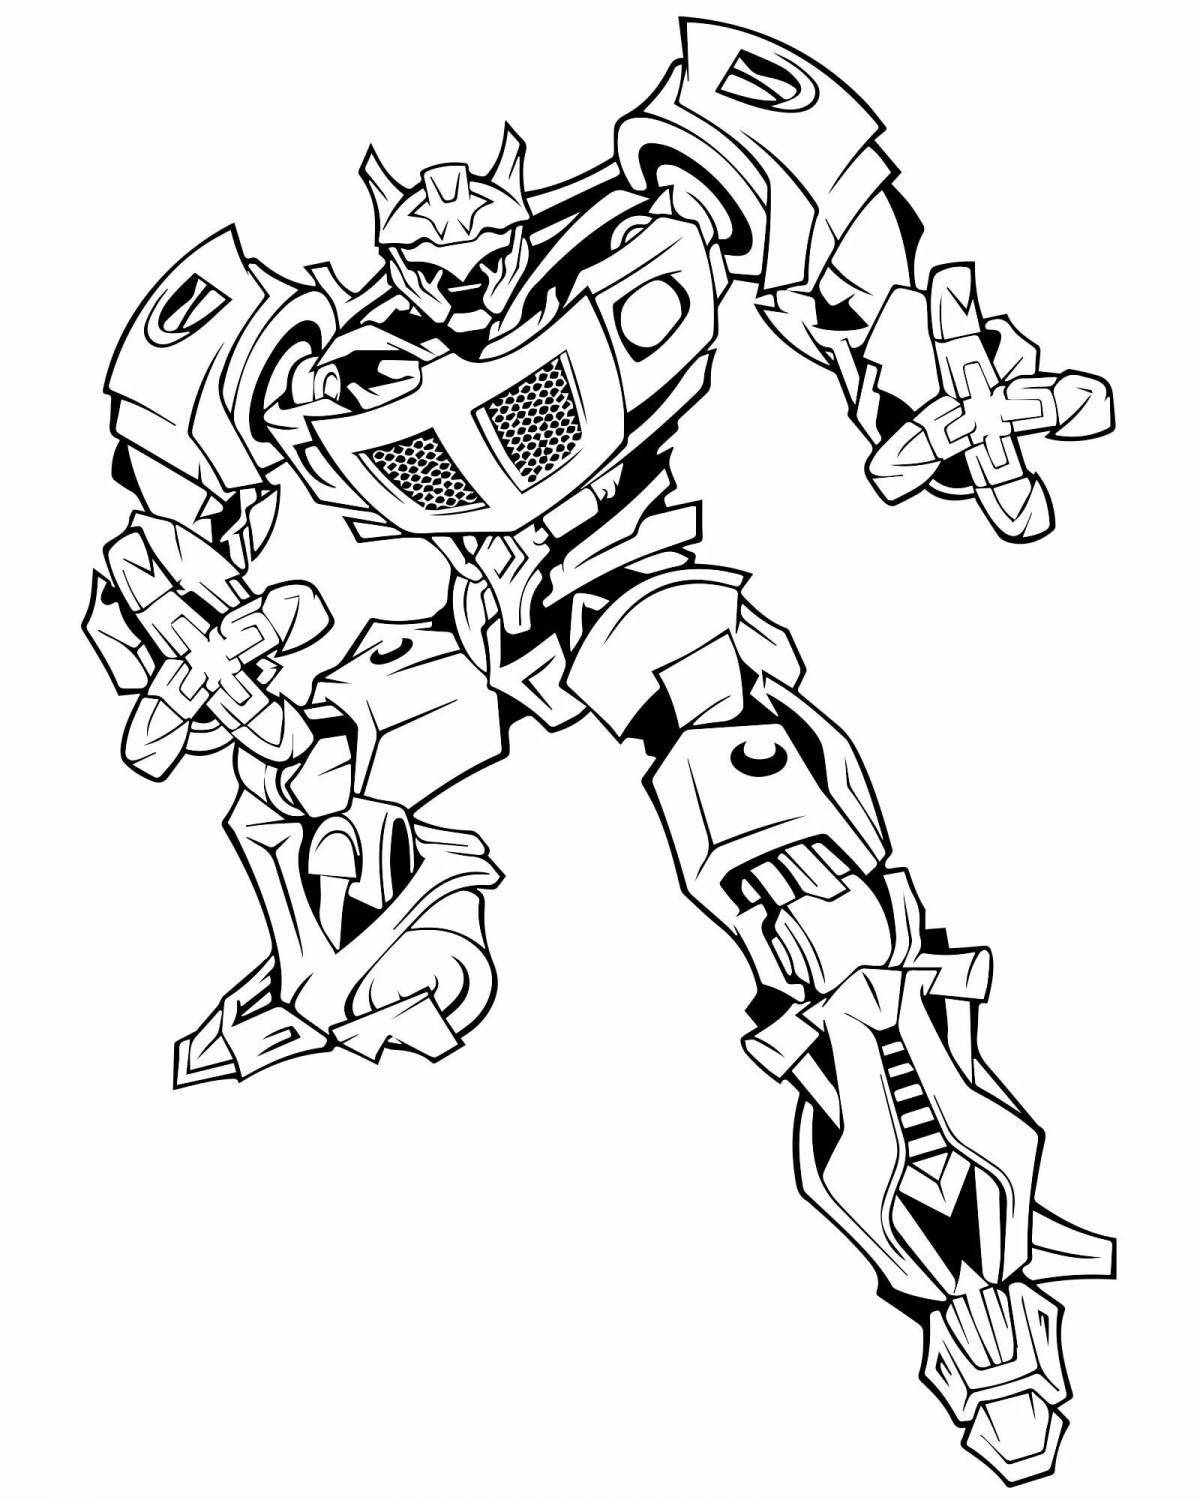 Creative autobots coloring pages for kids